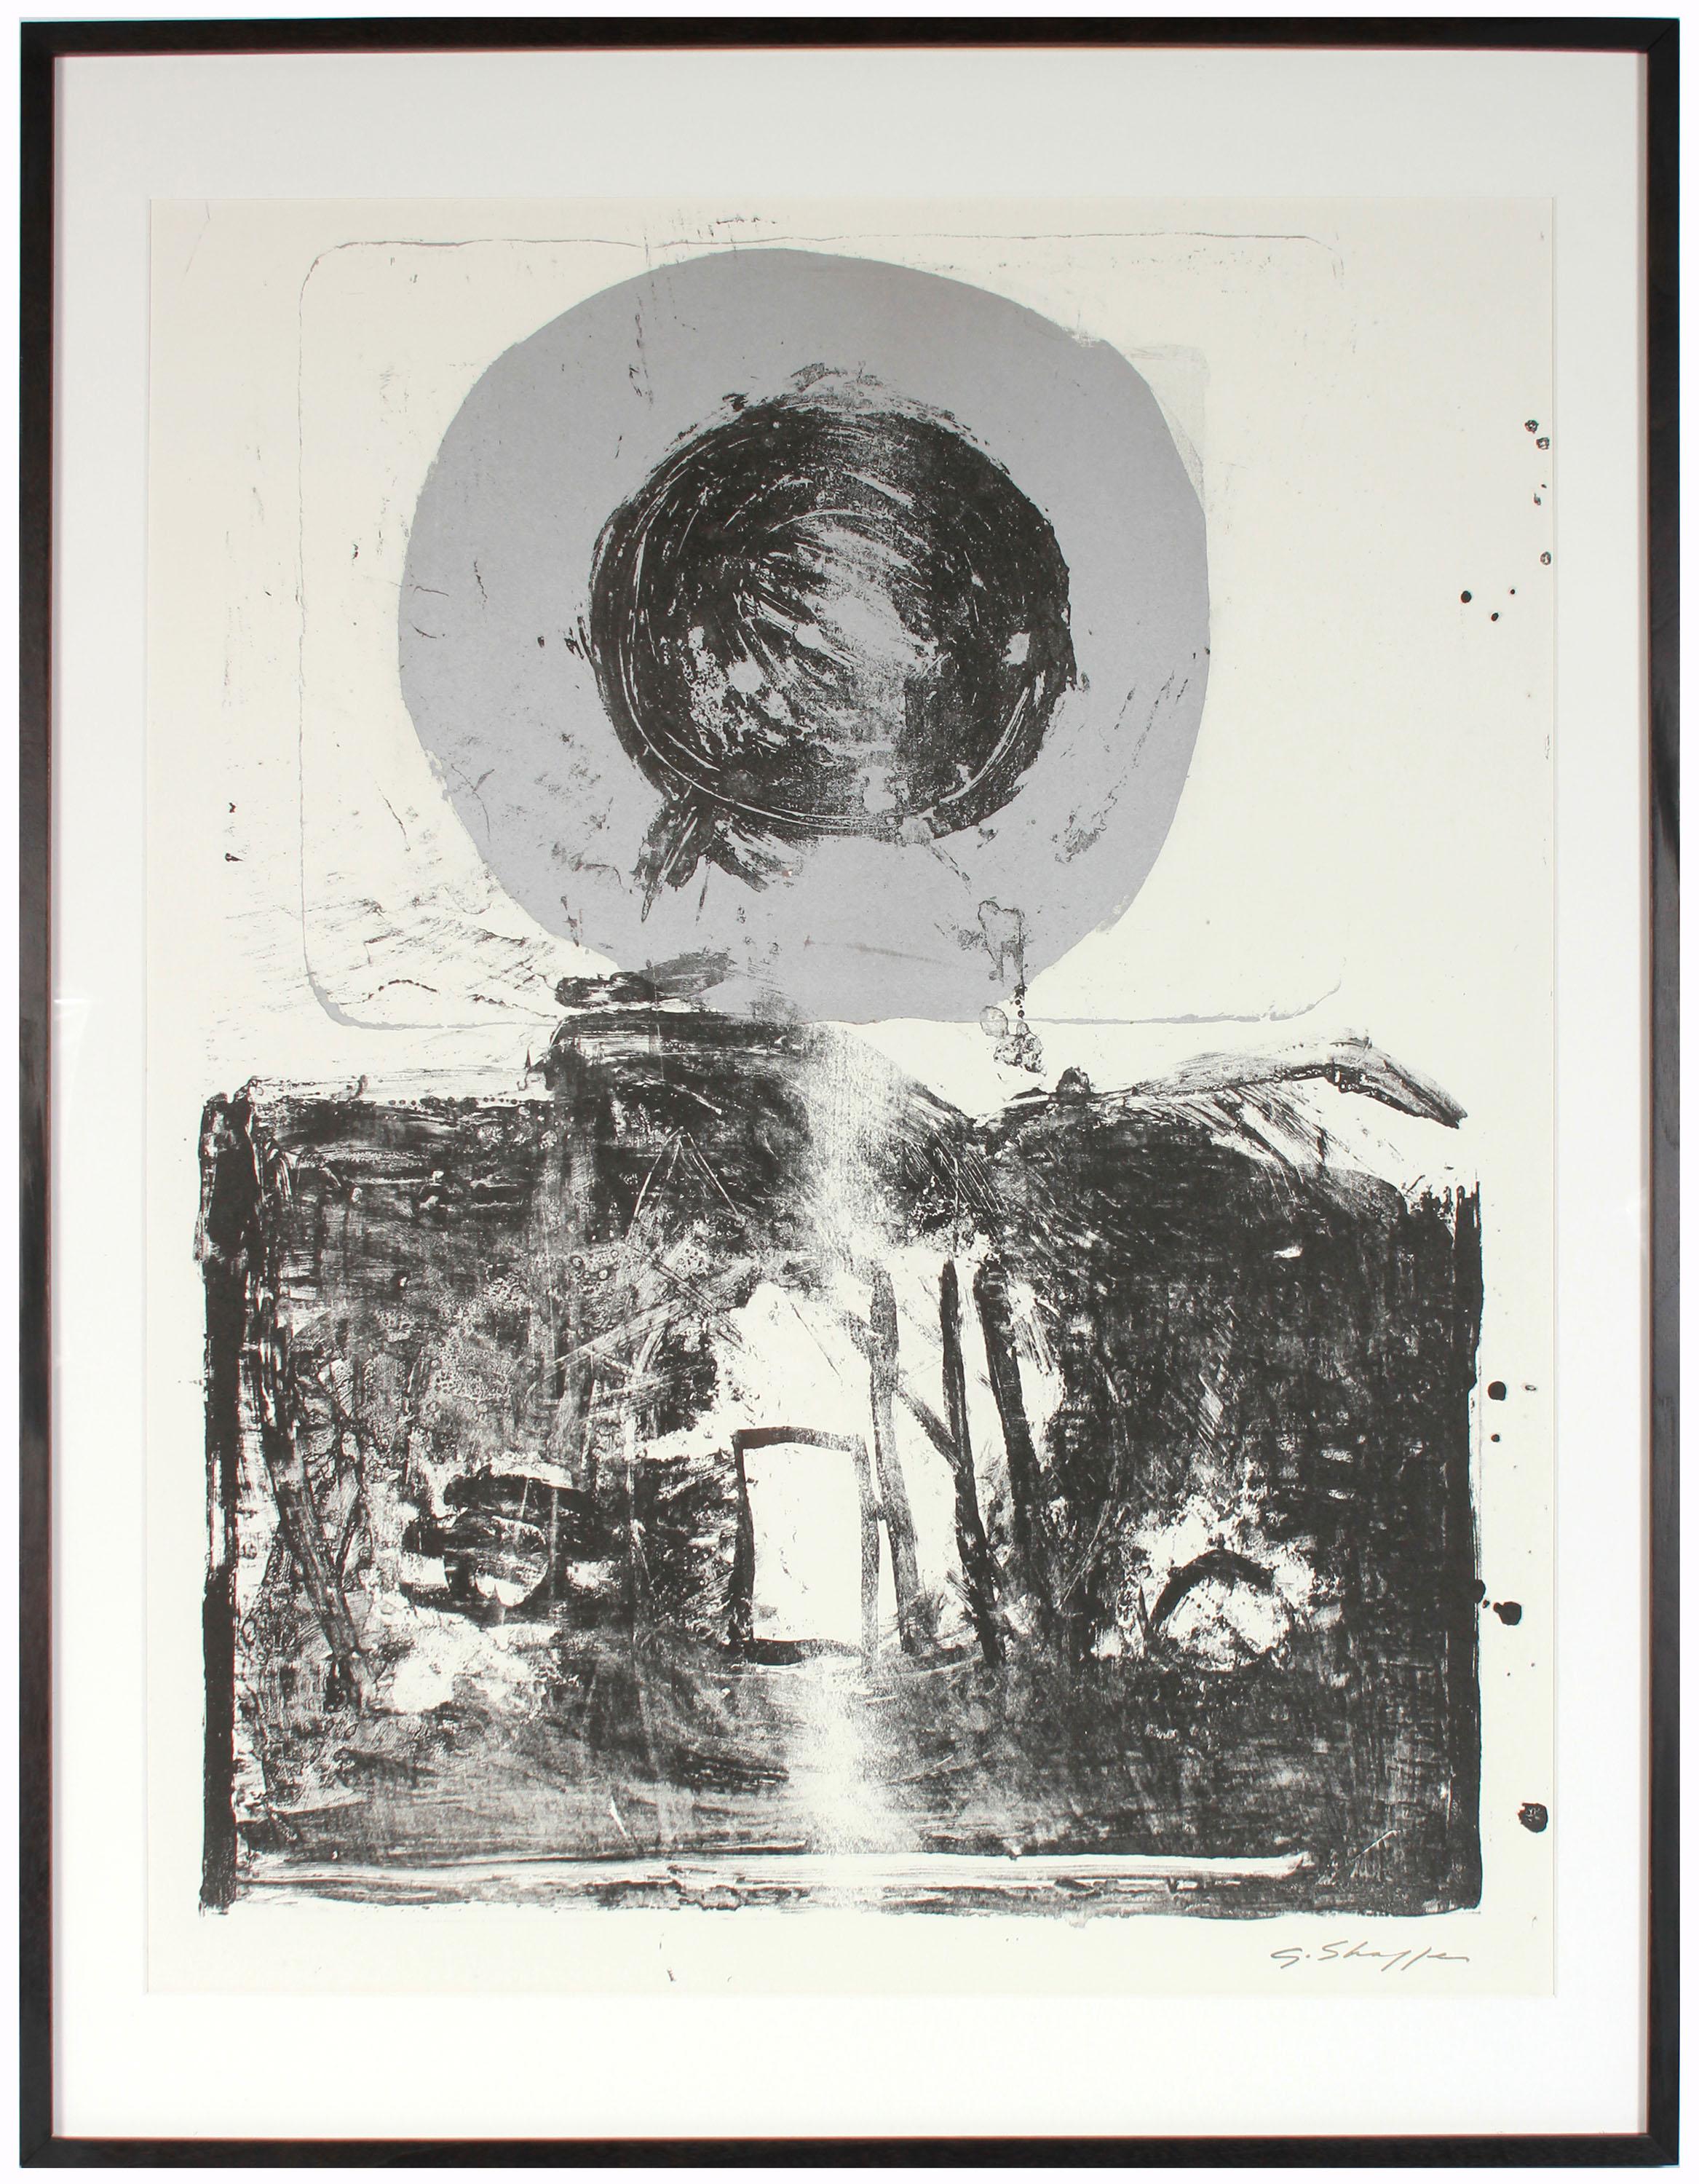 Large Abstract Expressionist Lithograph in Black and Gray, 1967 - Print by Gary Lee Shaffer